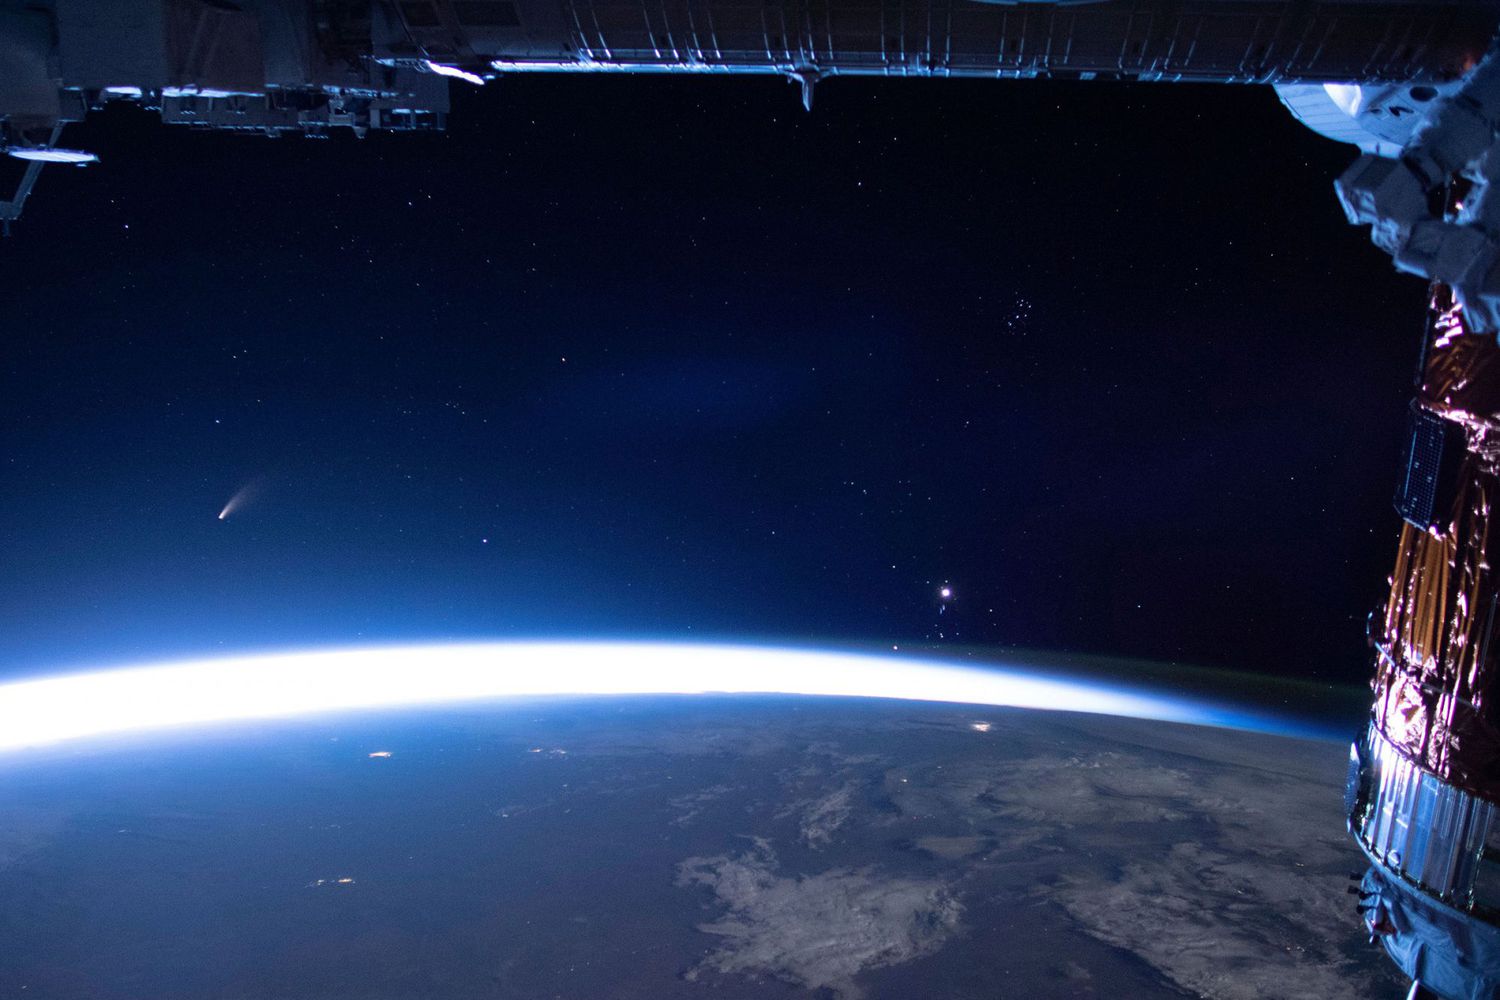 Watch Neowise Comet Zip Past Earth in 'Beautiful' Video from the International Space Station